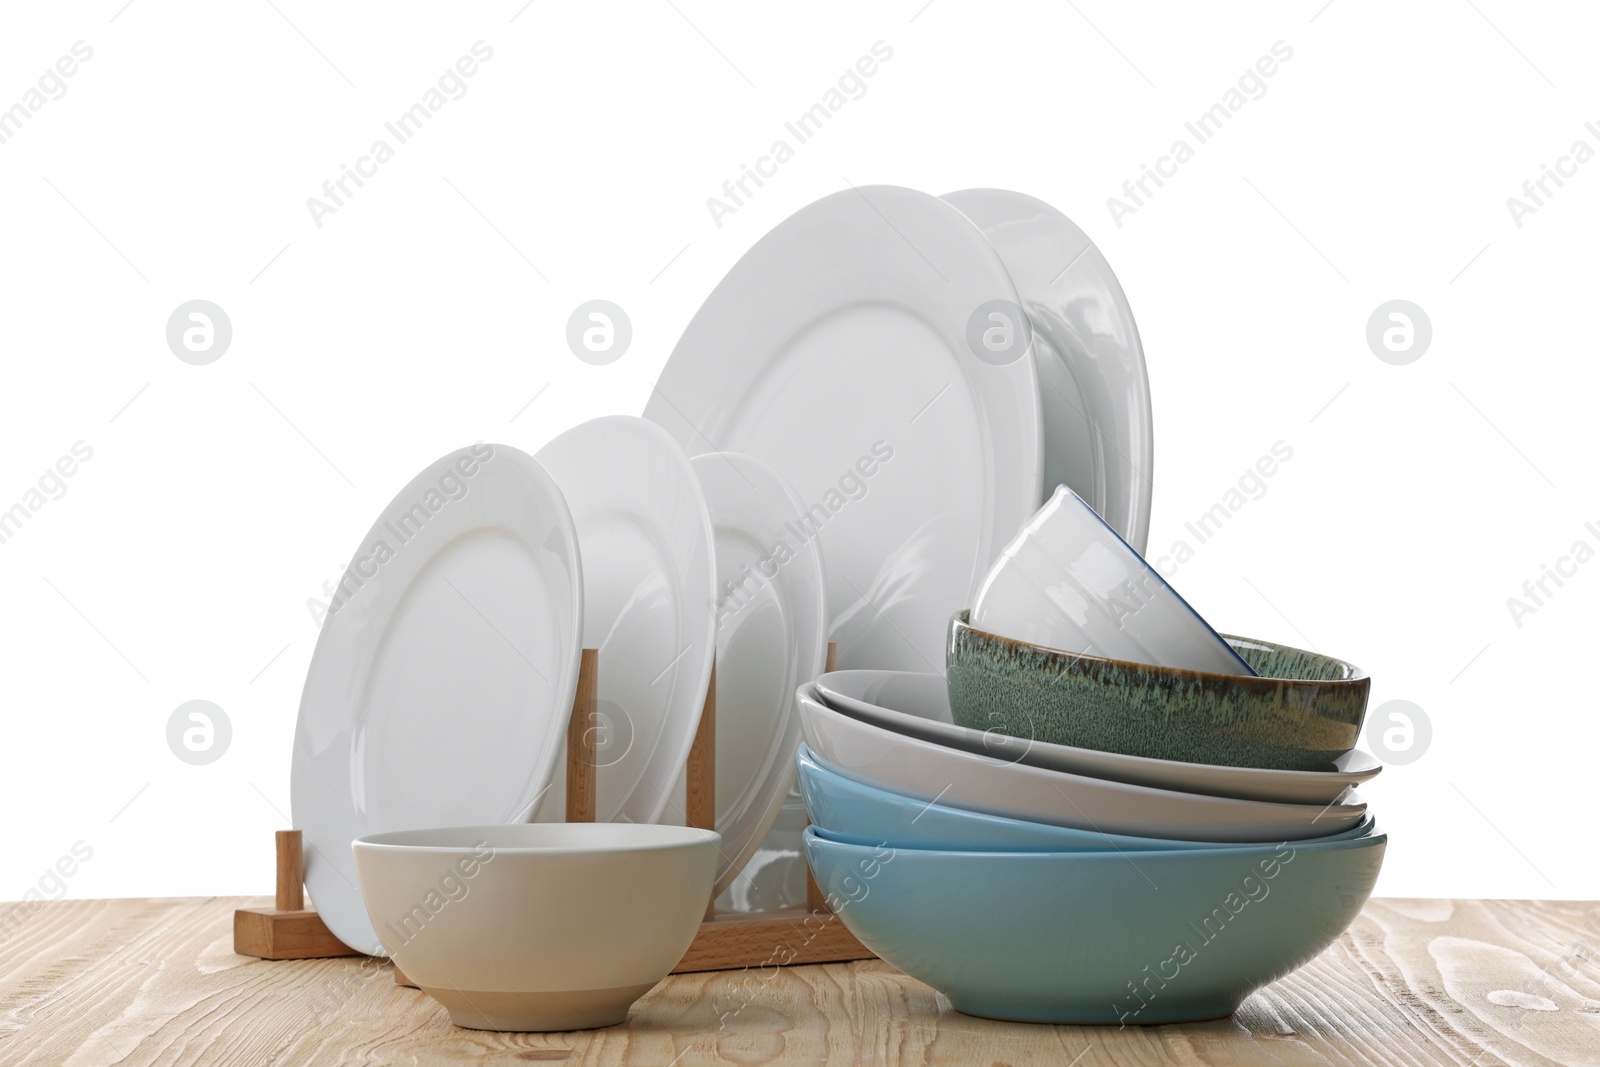 Photo of Set of clean color bowls and plates on wooden table against white background